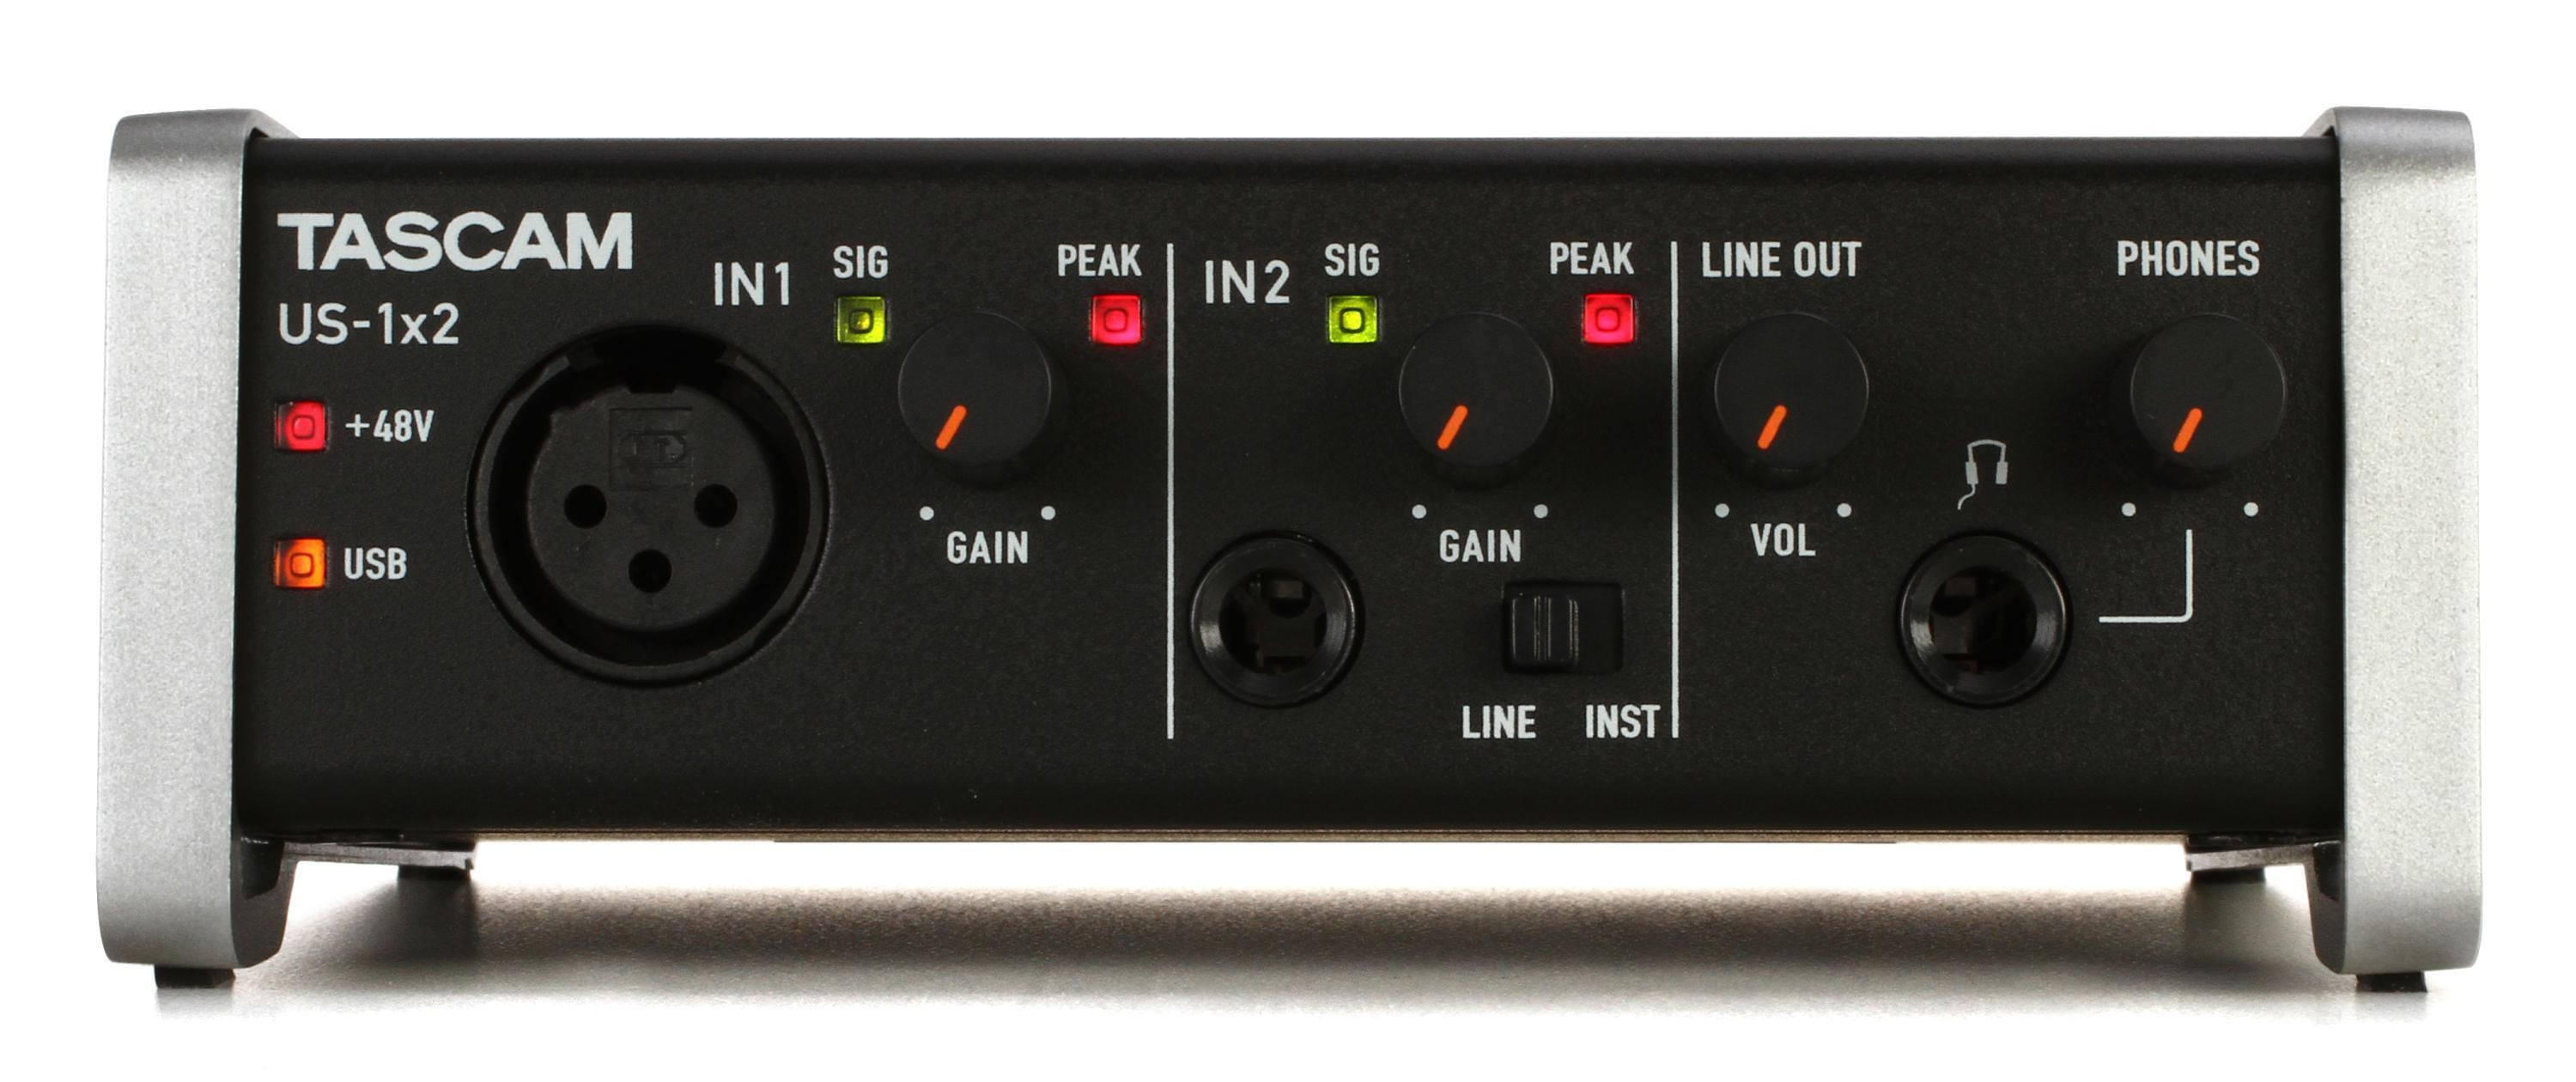 TASCAM US-1x2 USB Audio Interface | Sweetwater